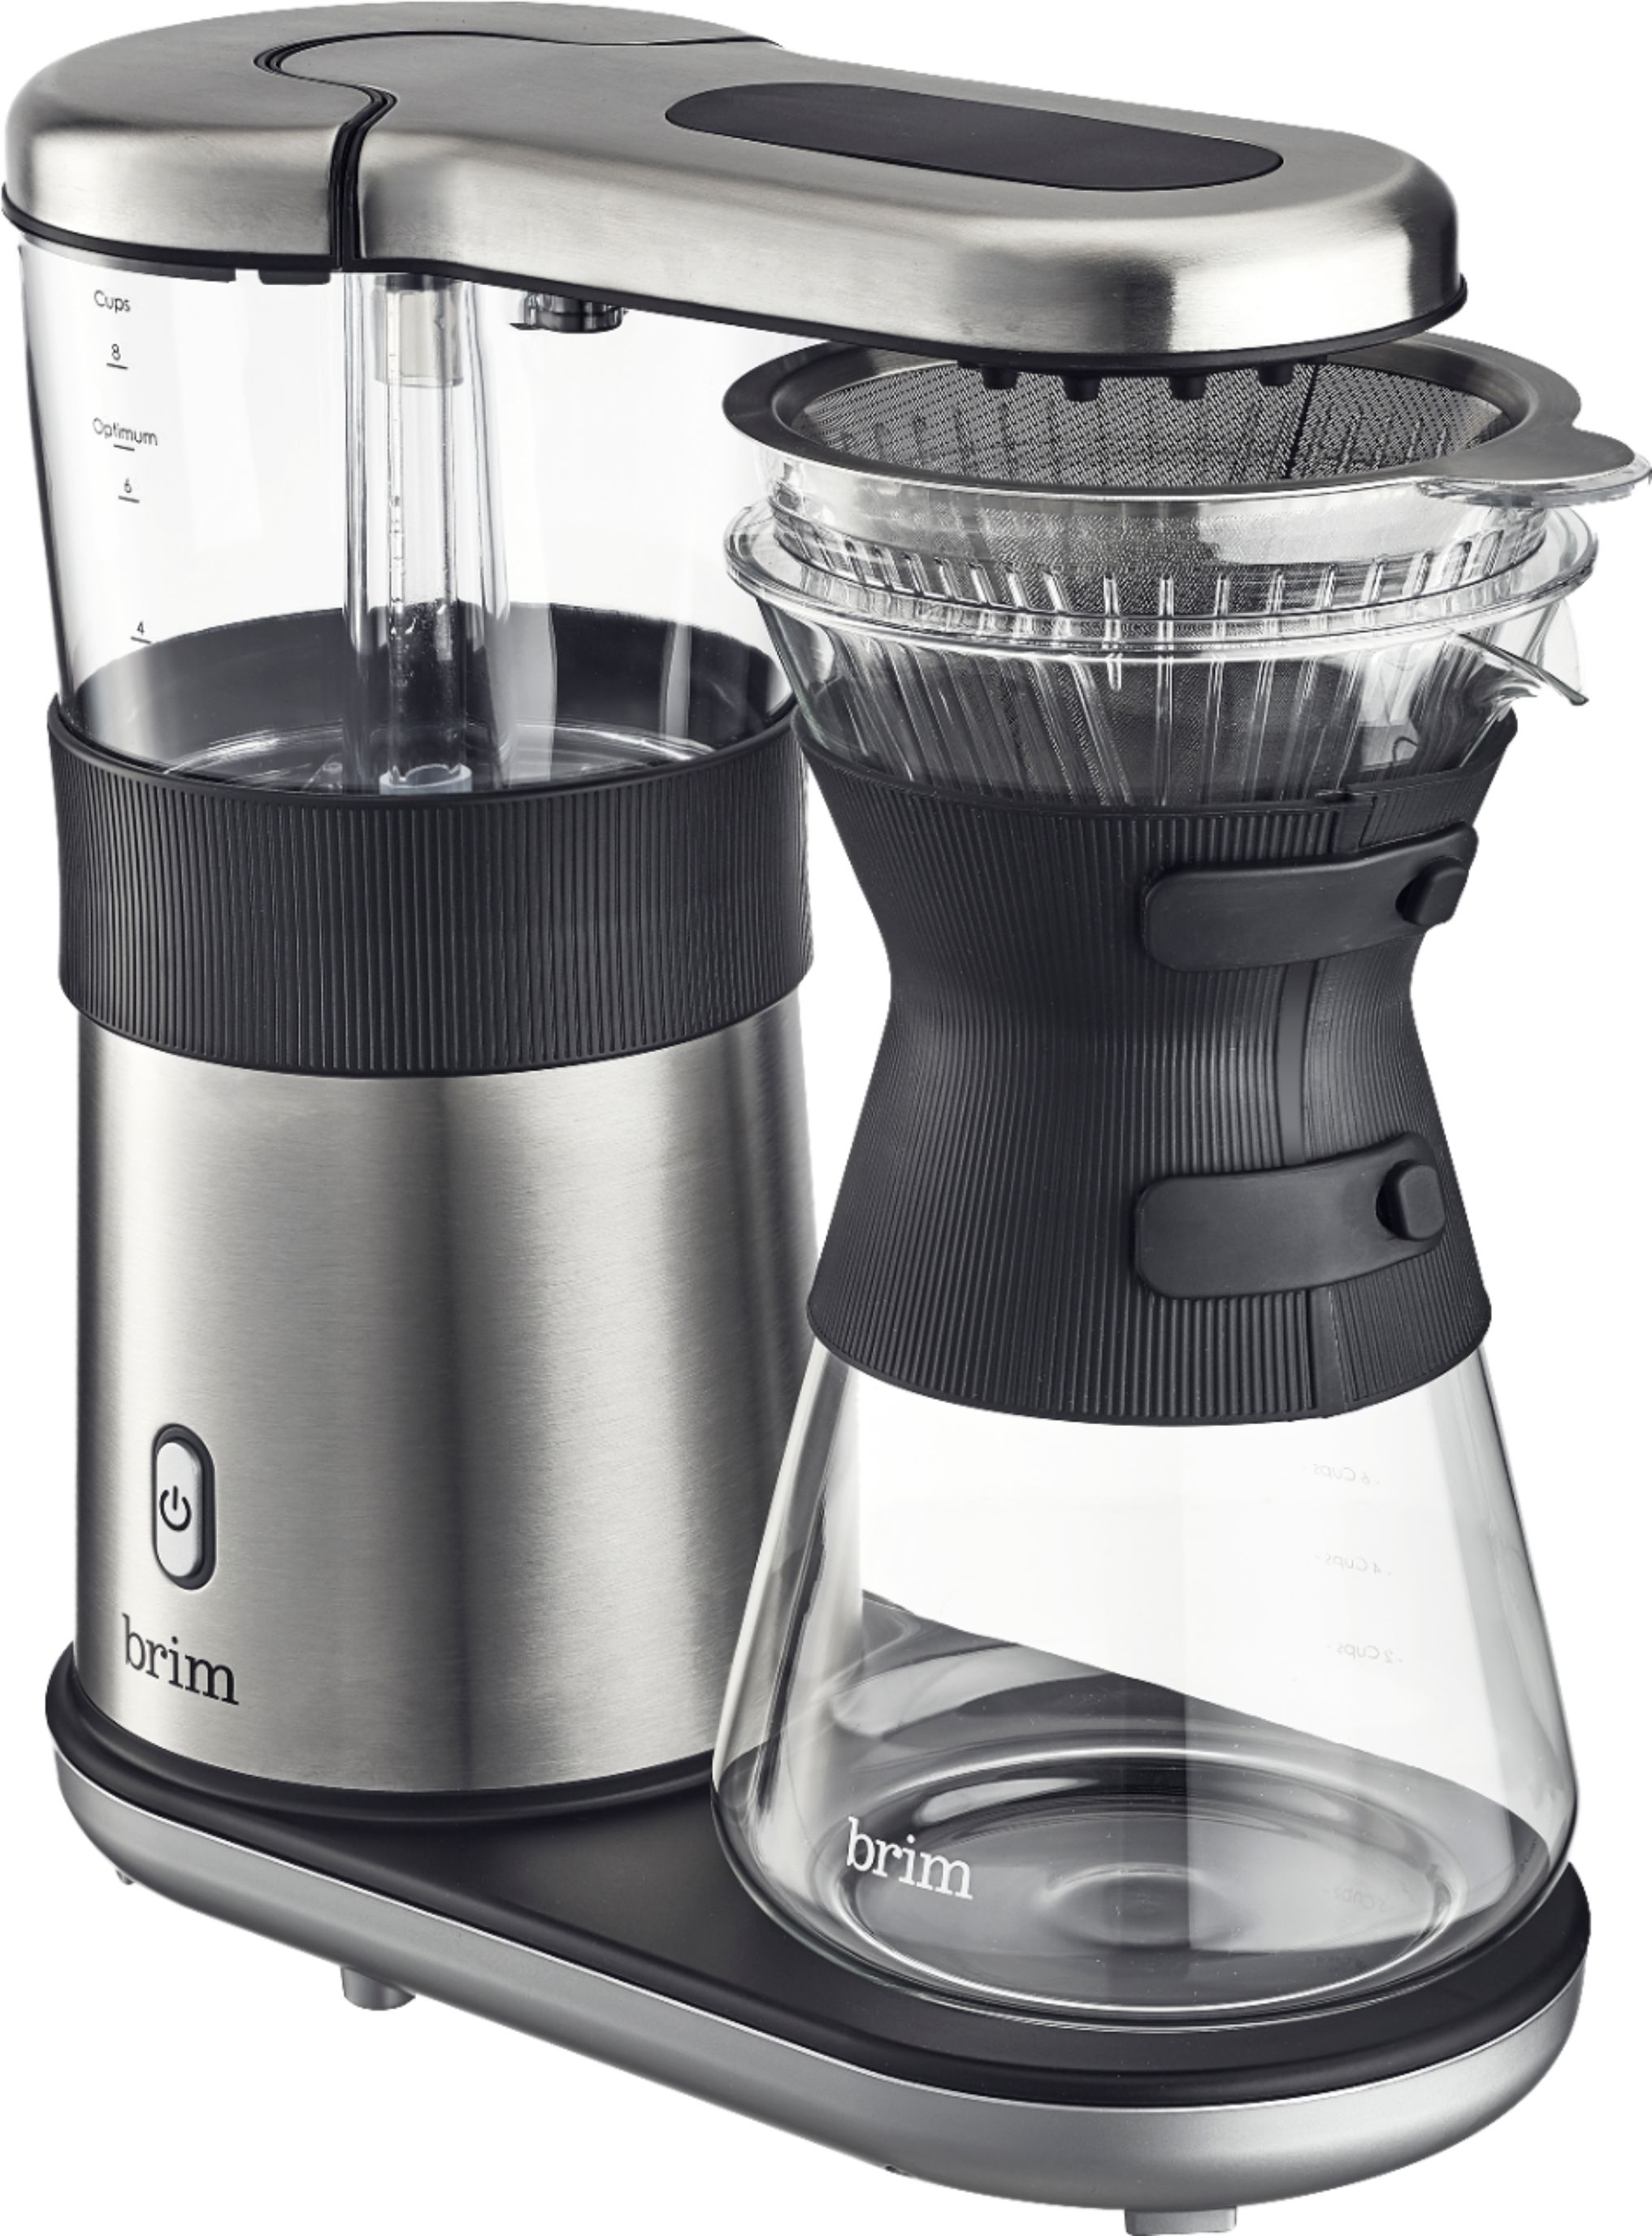 Angle View: Brim - 8-Cup Electric Pour Over Coffee Maker - Stainless Steel